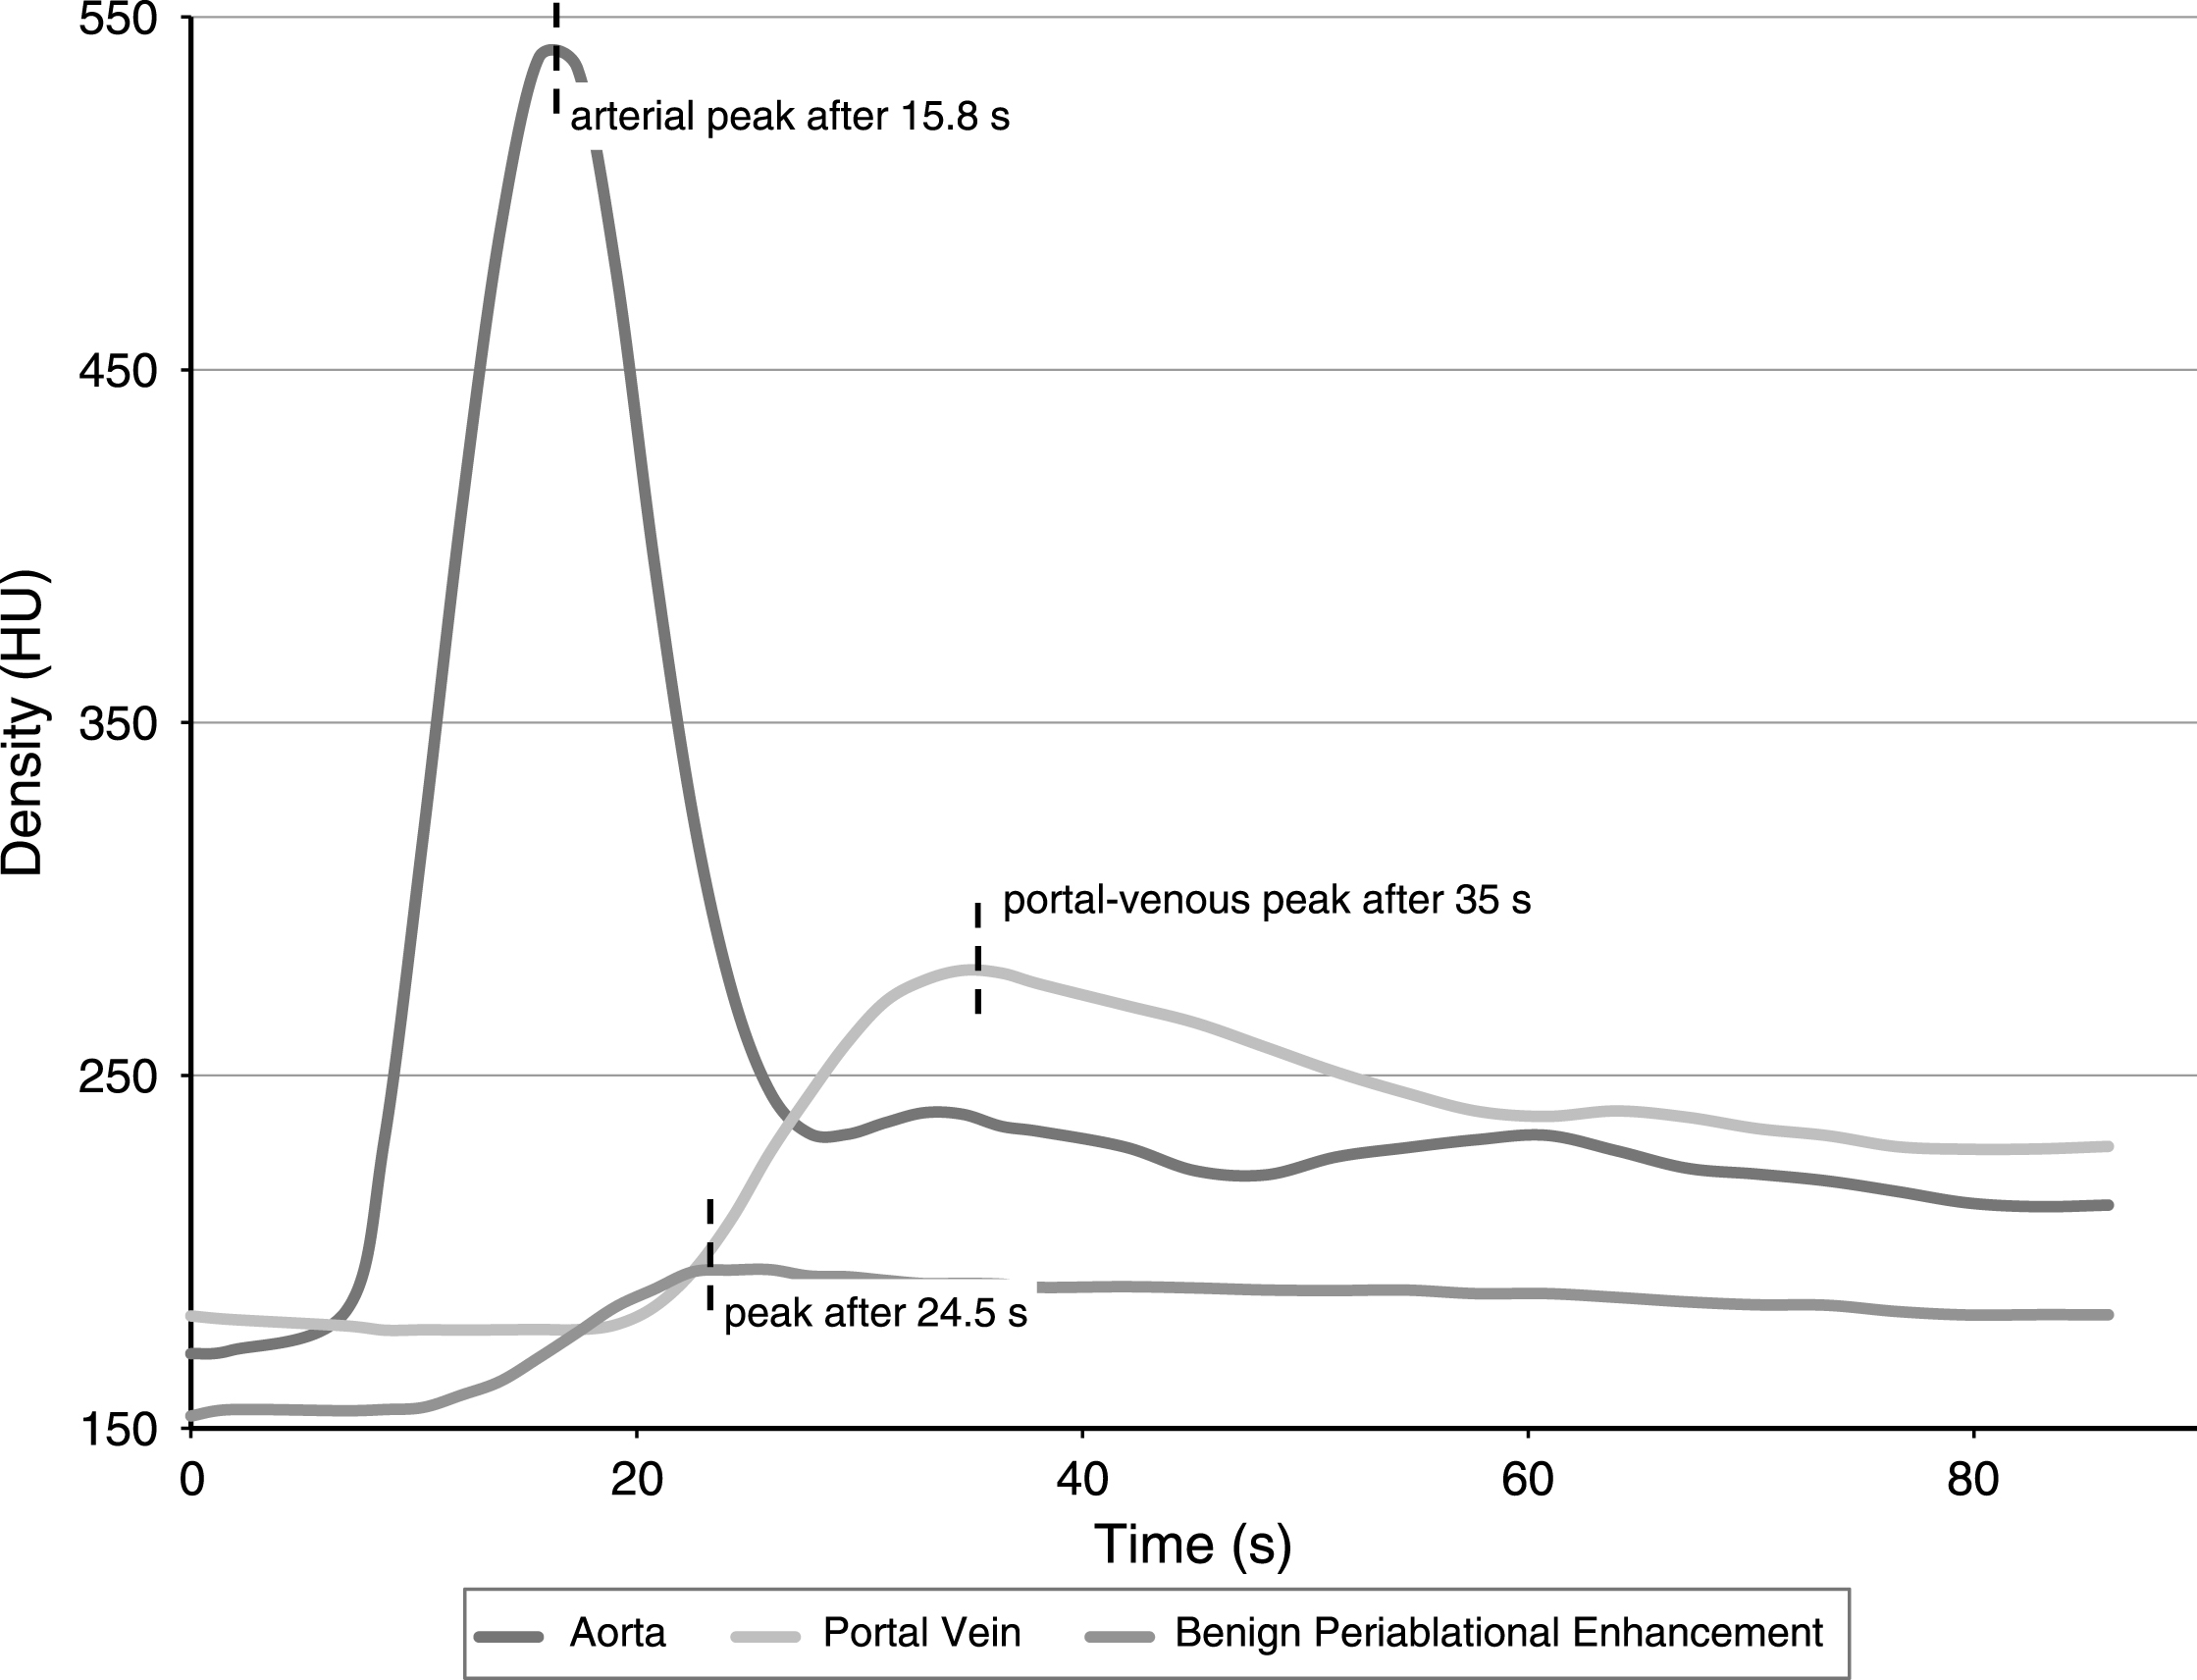 Exemplary time-density-curve for one single ablation zone: The peak of the benign periablational enhancement occurred 8.7 seconds after the peak perfusion in the abdominal aorta and 10.5 seconds before the peak perfusion in the central portal vein.